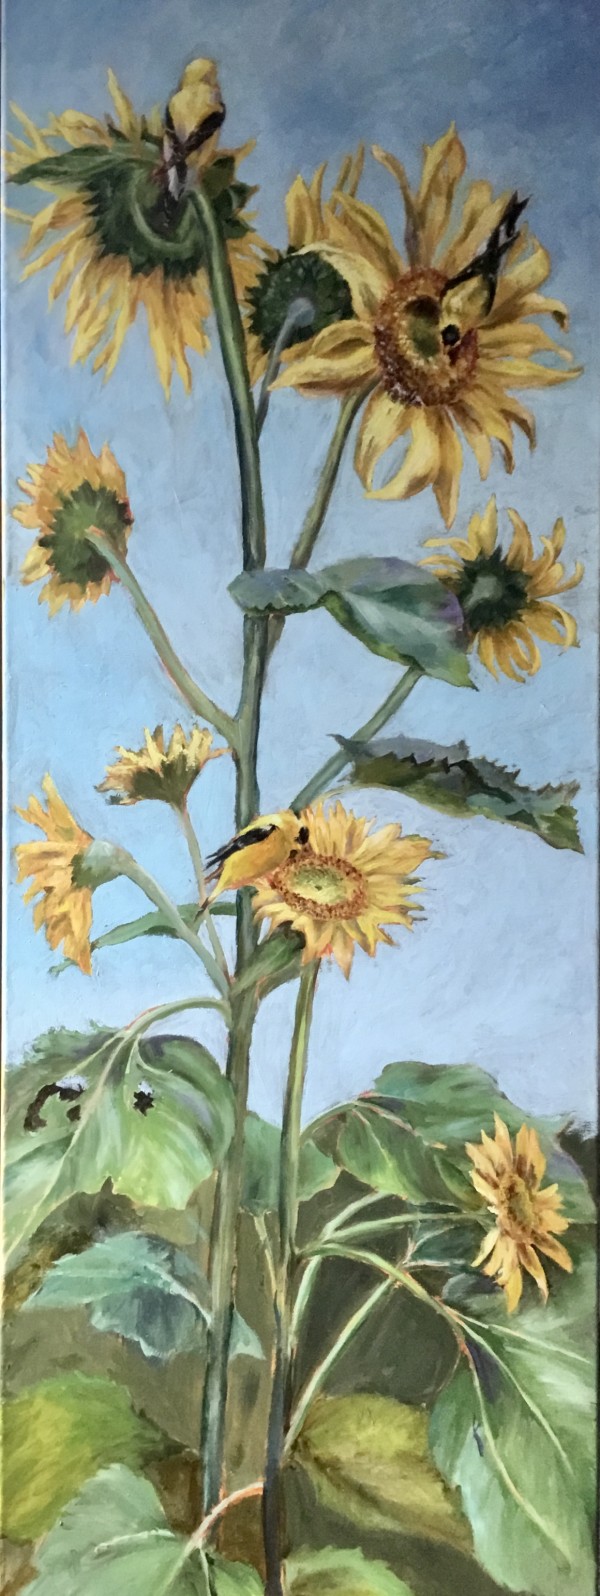 Sunflowers and Goldfinches by Lina Ferrara